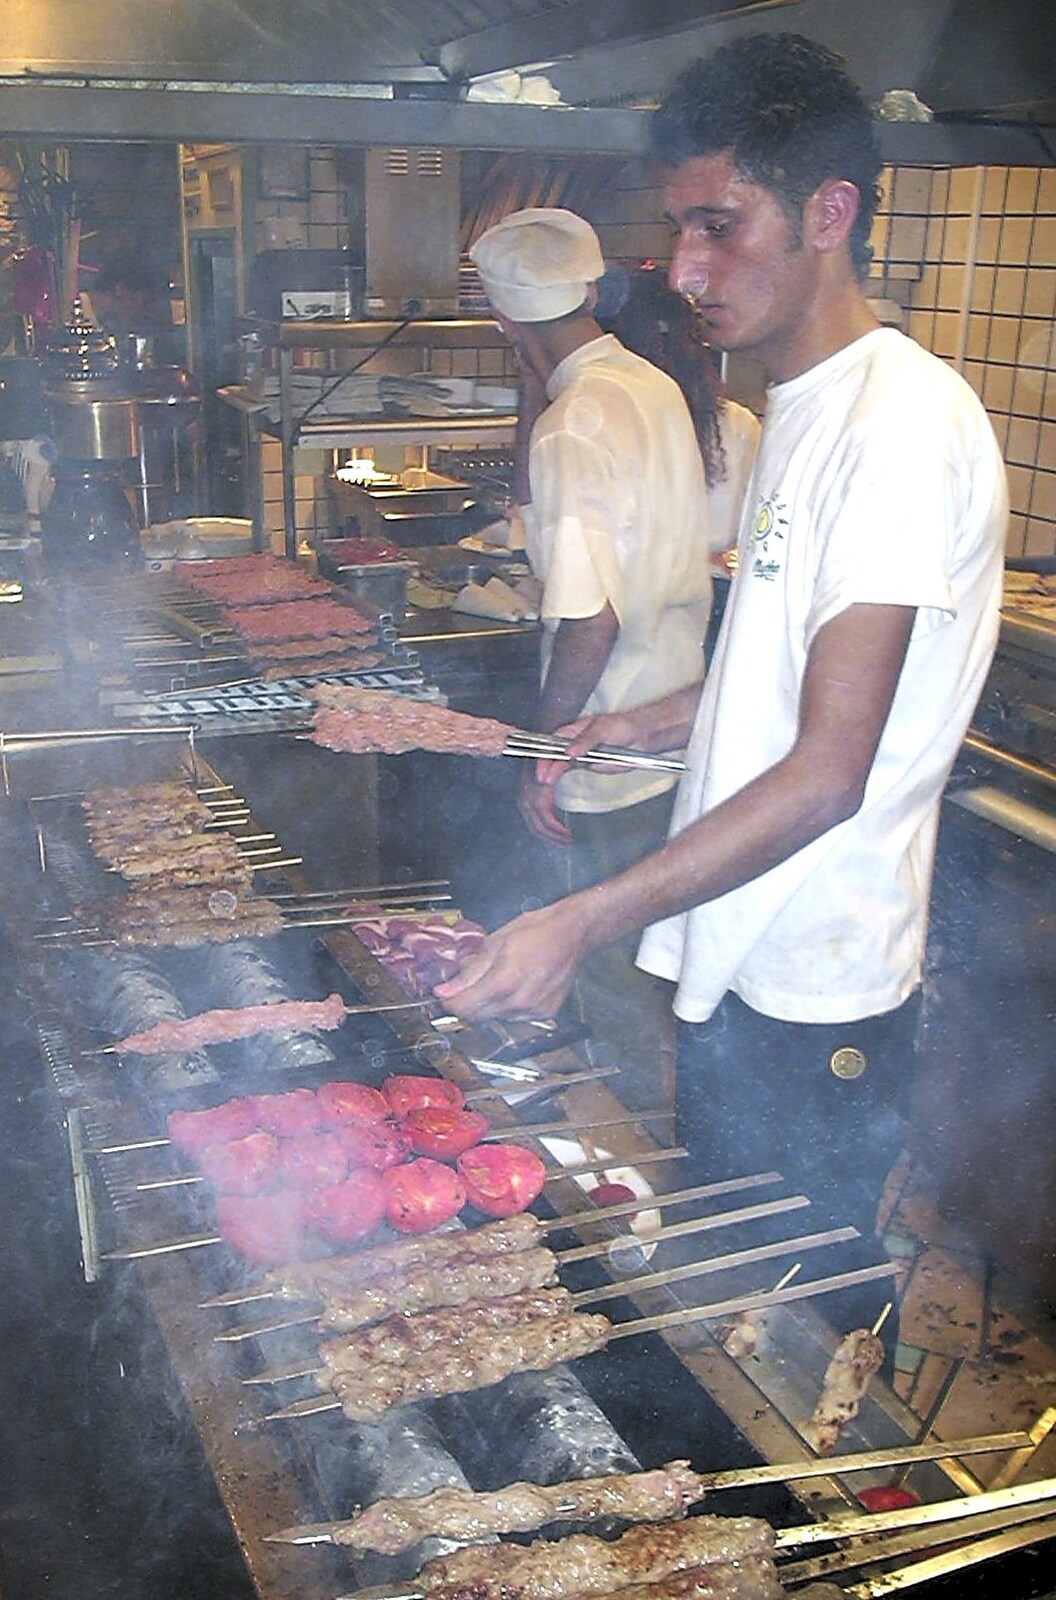 A Postcard From Athens: A Day Trip to the Olympics, Greece - 19th August 2004: Some dudes grill meat on a stick